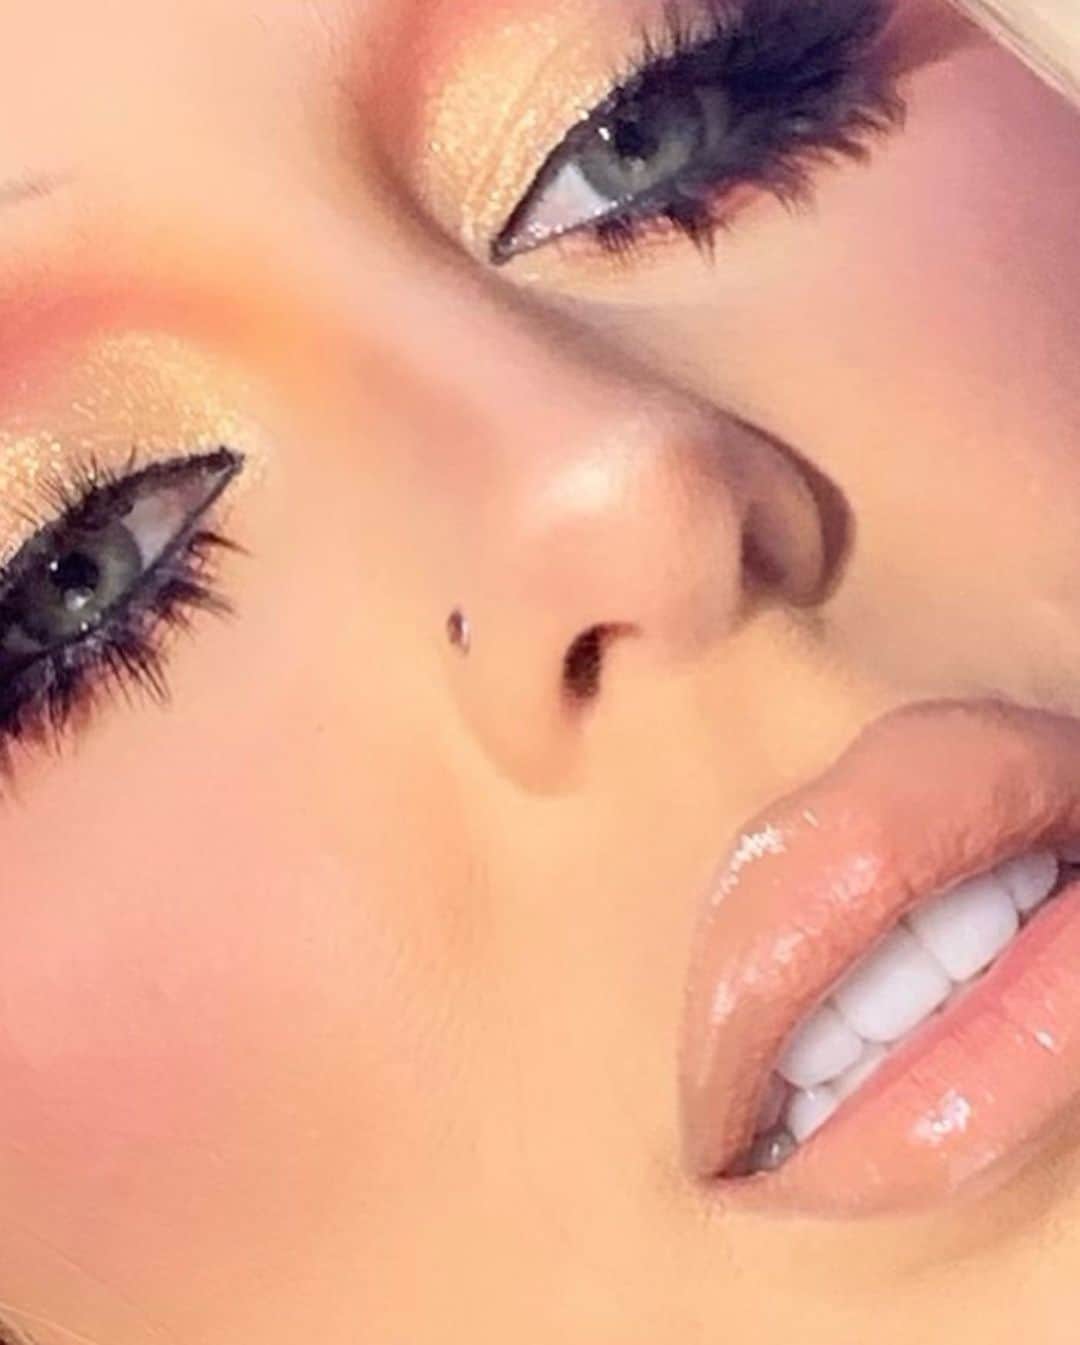 Chrisspyさんのインスタグラム写真 - (ChrisspyInstagram)「Did I nail the iconic @xtina look?? This was one of my favorite transformations I’m living for the 2000’s glam and the skinny brows!! Wait until you see the video!! 🥰 Face:  @dominiquecosmetics Blur & Moisture Serum Primer  @juviasplace I Am Magic Foundation 540 Giza  @toofaced Chocolate Soleil Bronzer  @hankandhenrybeauty Blush ‘Em Blush Palette  @onesize Translucent Setting Powder  @jaclynhillcosmetics Spark$ Highlighter  @maccosmetics NC30 Studio Fix Powder  Eyes: @dominiquecosmetics Now or Never Palette  @toofaced Light My Fire Palette  @makeupbymario Master Crystal Reflector- Citrine  @makeupforever Artist Color Pencil- Whatever Black @elfcosmetics Jet Black Liquid Liner @kvdbeauty Trooper Black Mascara  @rokaelbeautylashes Full Moon Lashes  @anastasiabeverlyhills Contour Palette  @kyliecosmetics Kybrow Cool Brown Brow Podwer Duo  Lips:  @jaclynhillcosmetics Praline Lip Liner  @meltcosmetics Dilemma Lip Stick  @artistcouture Peepshow Lip Gloss  #chrisspy #xtina #christinaaguilera #2000s #transformation #dominiquecosmetics #juviasplace #toofaced #hankandhenrybeauty #onesizebeauty #makeupbymario #maccosmetics #elfcosmetics #makeupforever #kyliecosmetics #kvdbeauty #anastasiabeverlyhills #artistcouture #meltcosmetics」4月3日 3時01分 - chrisspy